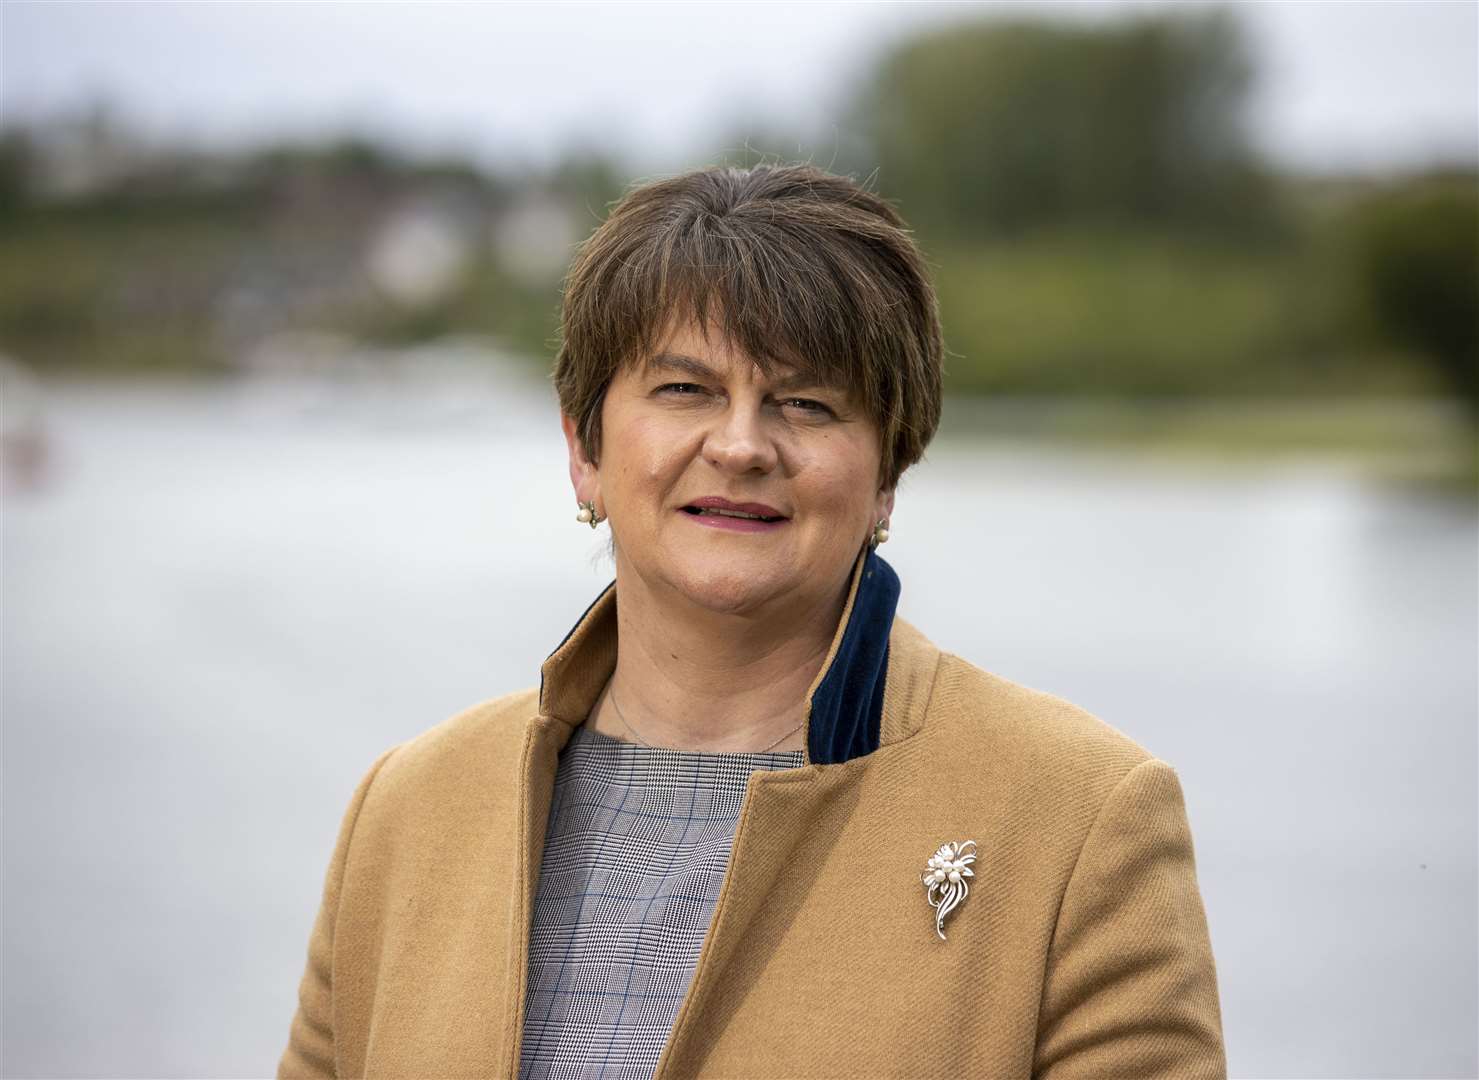 Baroness Arlene Foster, former first minister of Northern Ireland and former leader of the DUP, is expected to be among those to give evidence (Liam McBurney/PA)